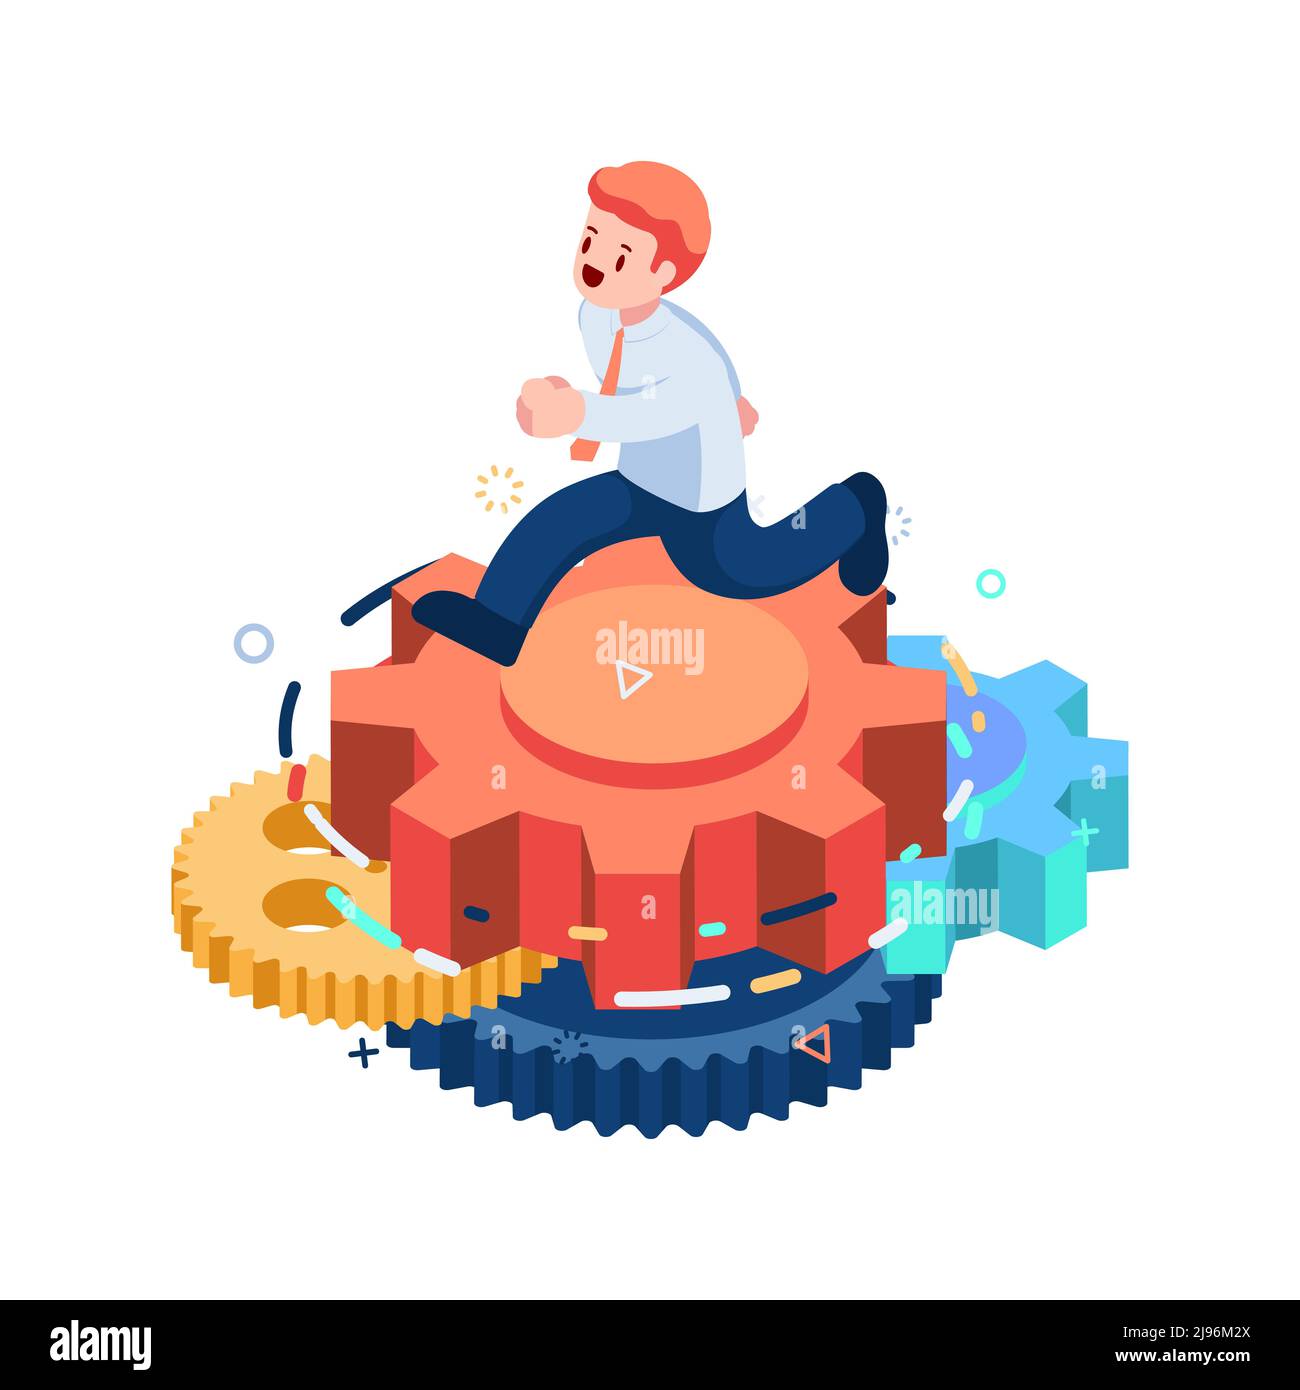 Flat 3d Isometric Businessman Running on Gears. Business Process Concept. Stock Vector